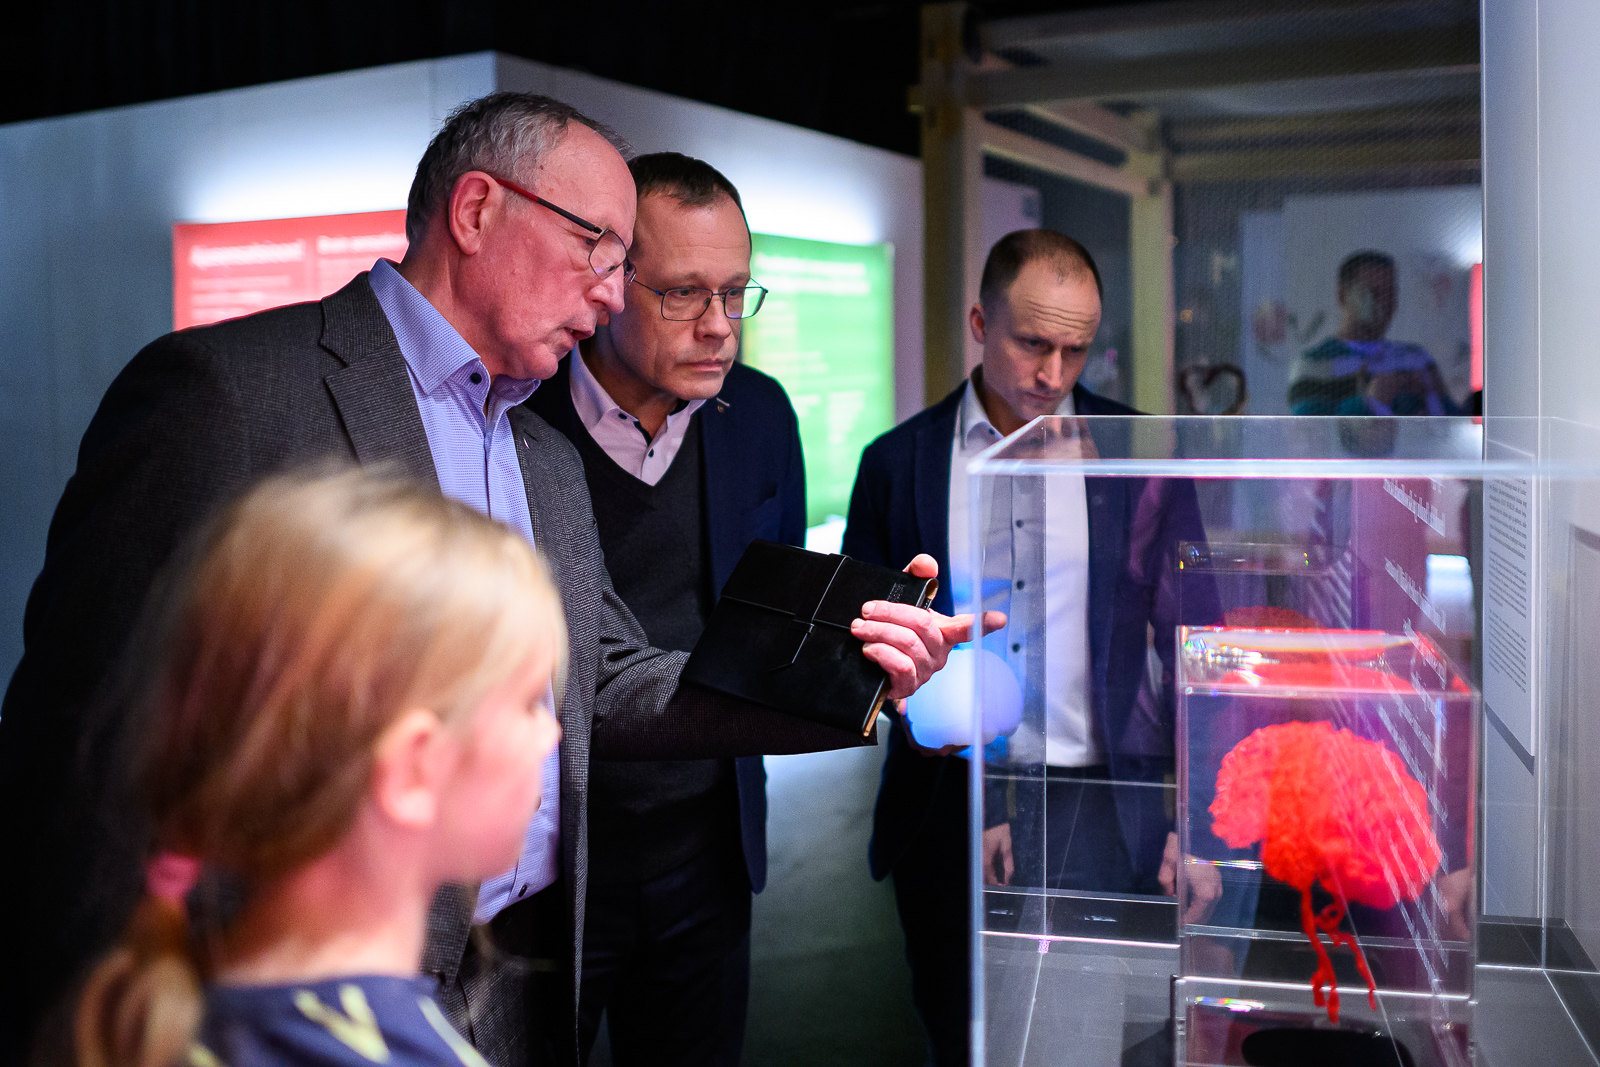 New interactive exhibition about the brain opens at Ahhaa Science Centre in Tartu